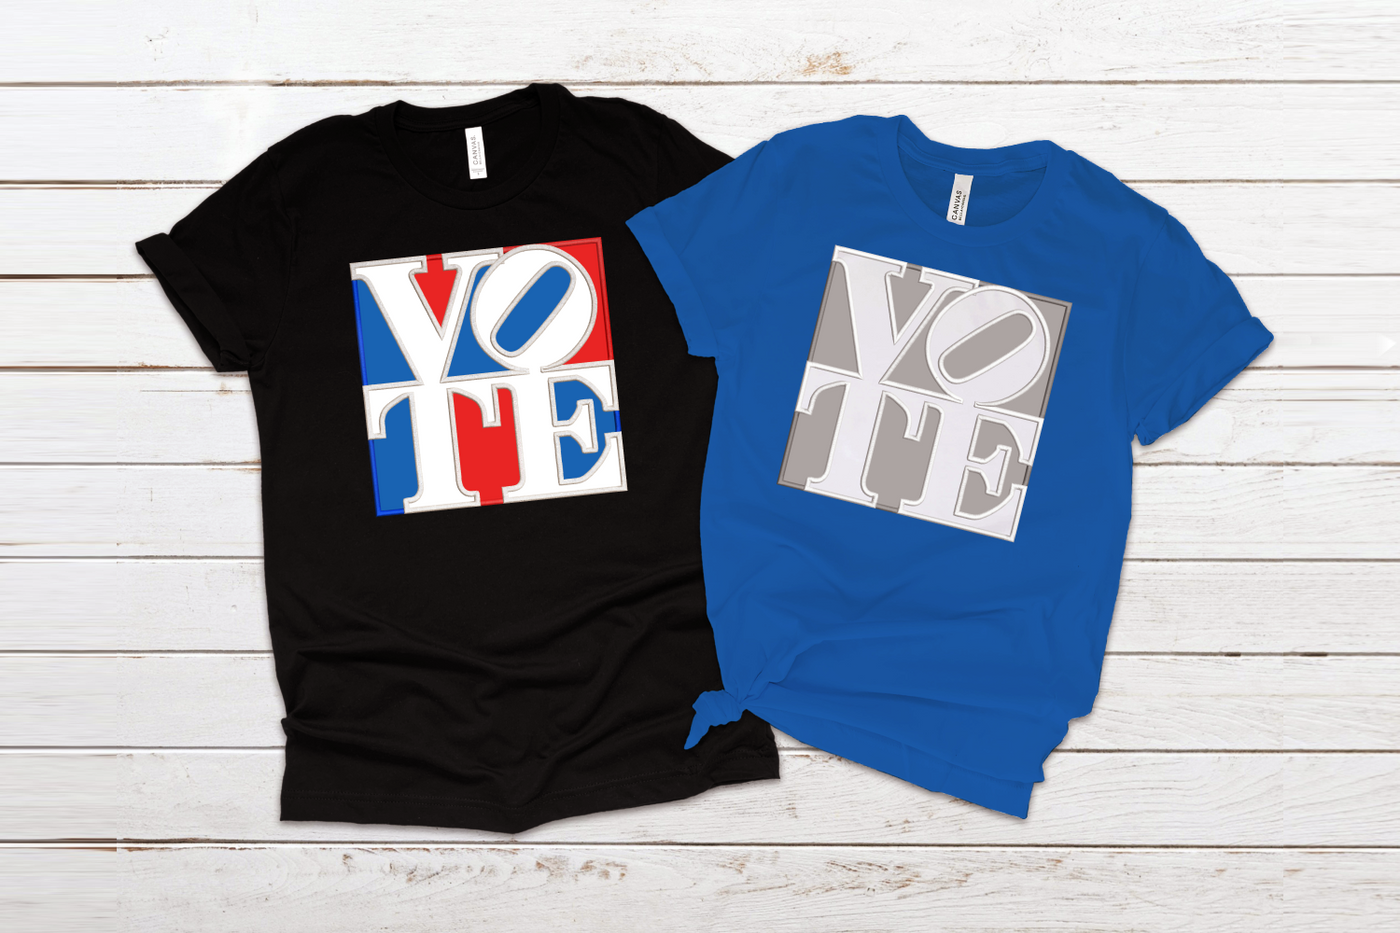 Two tees, each with a "VOTE" applique design set inside of a square.